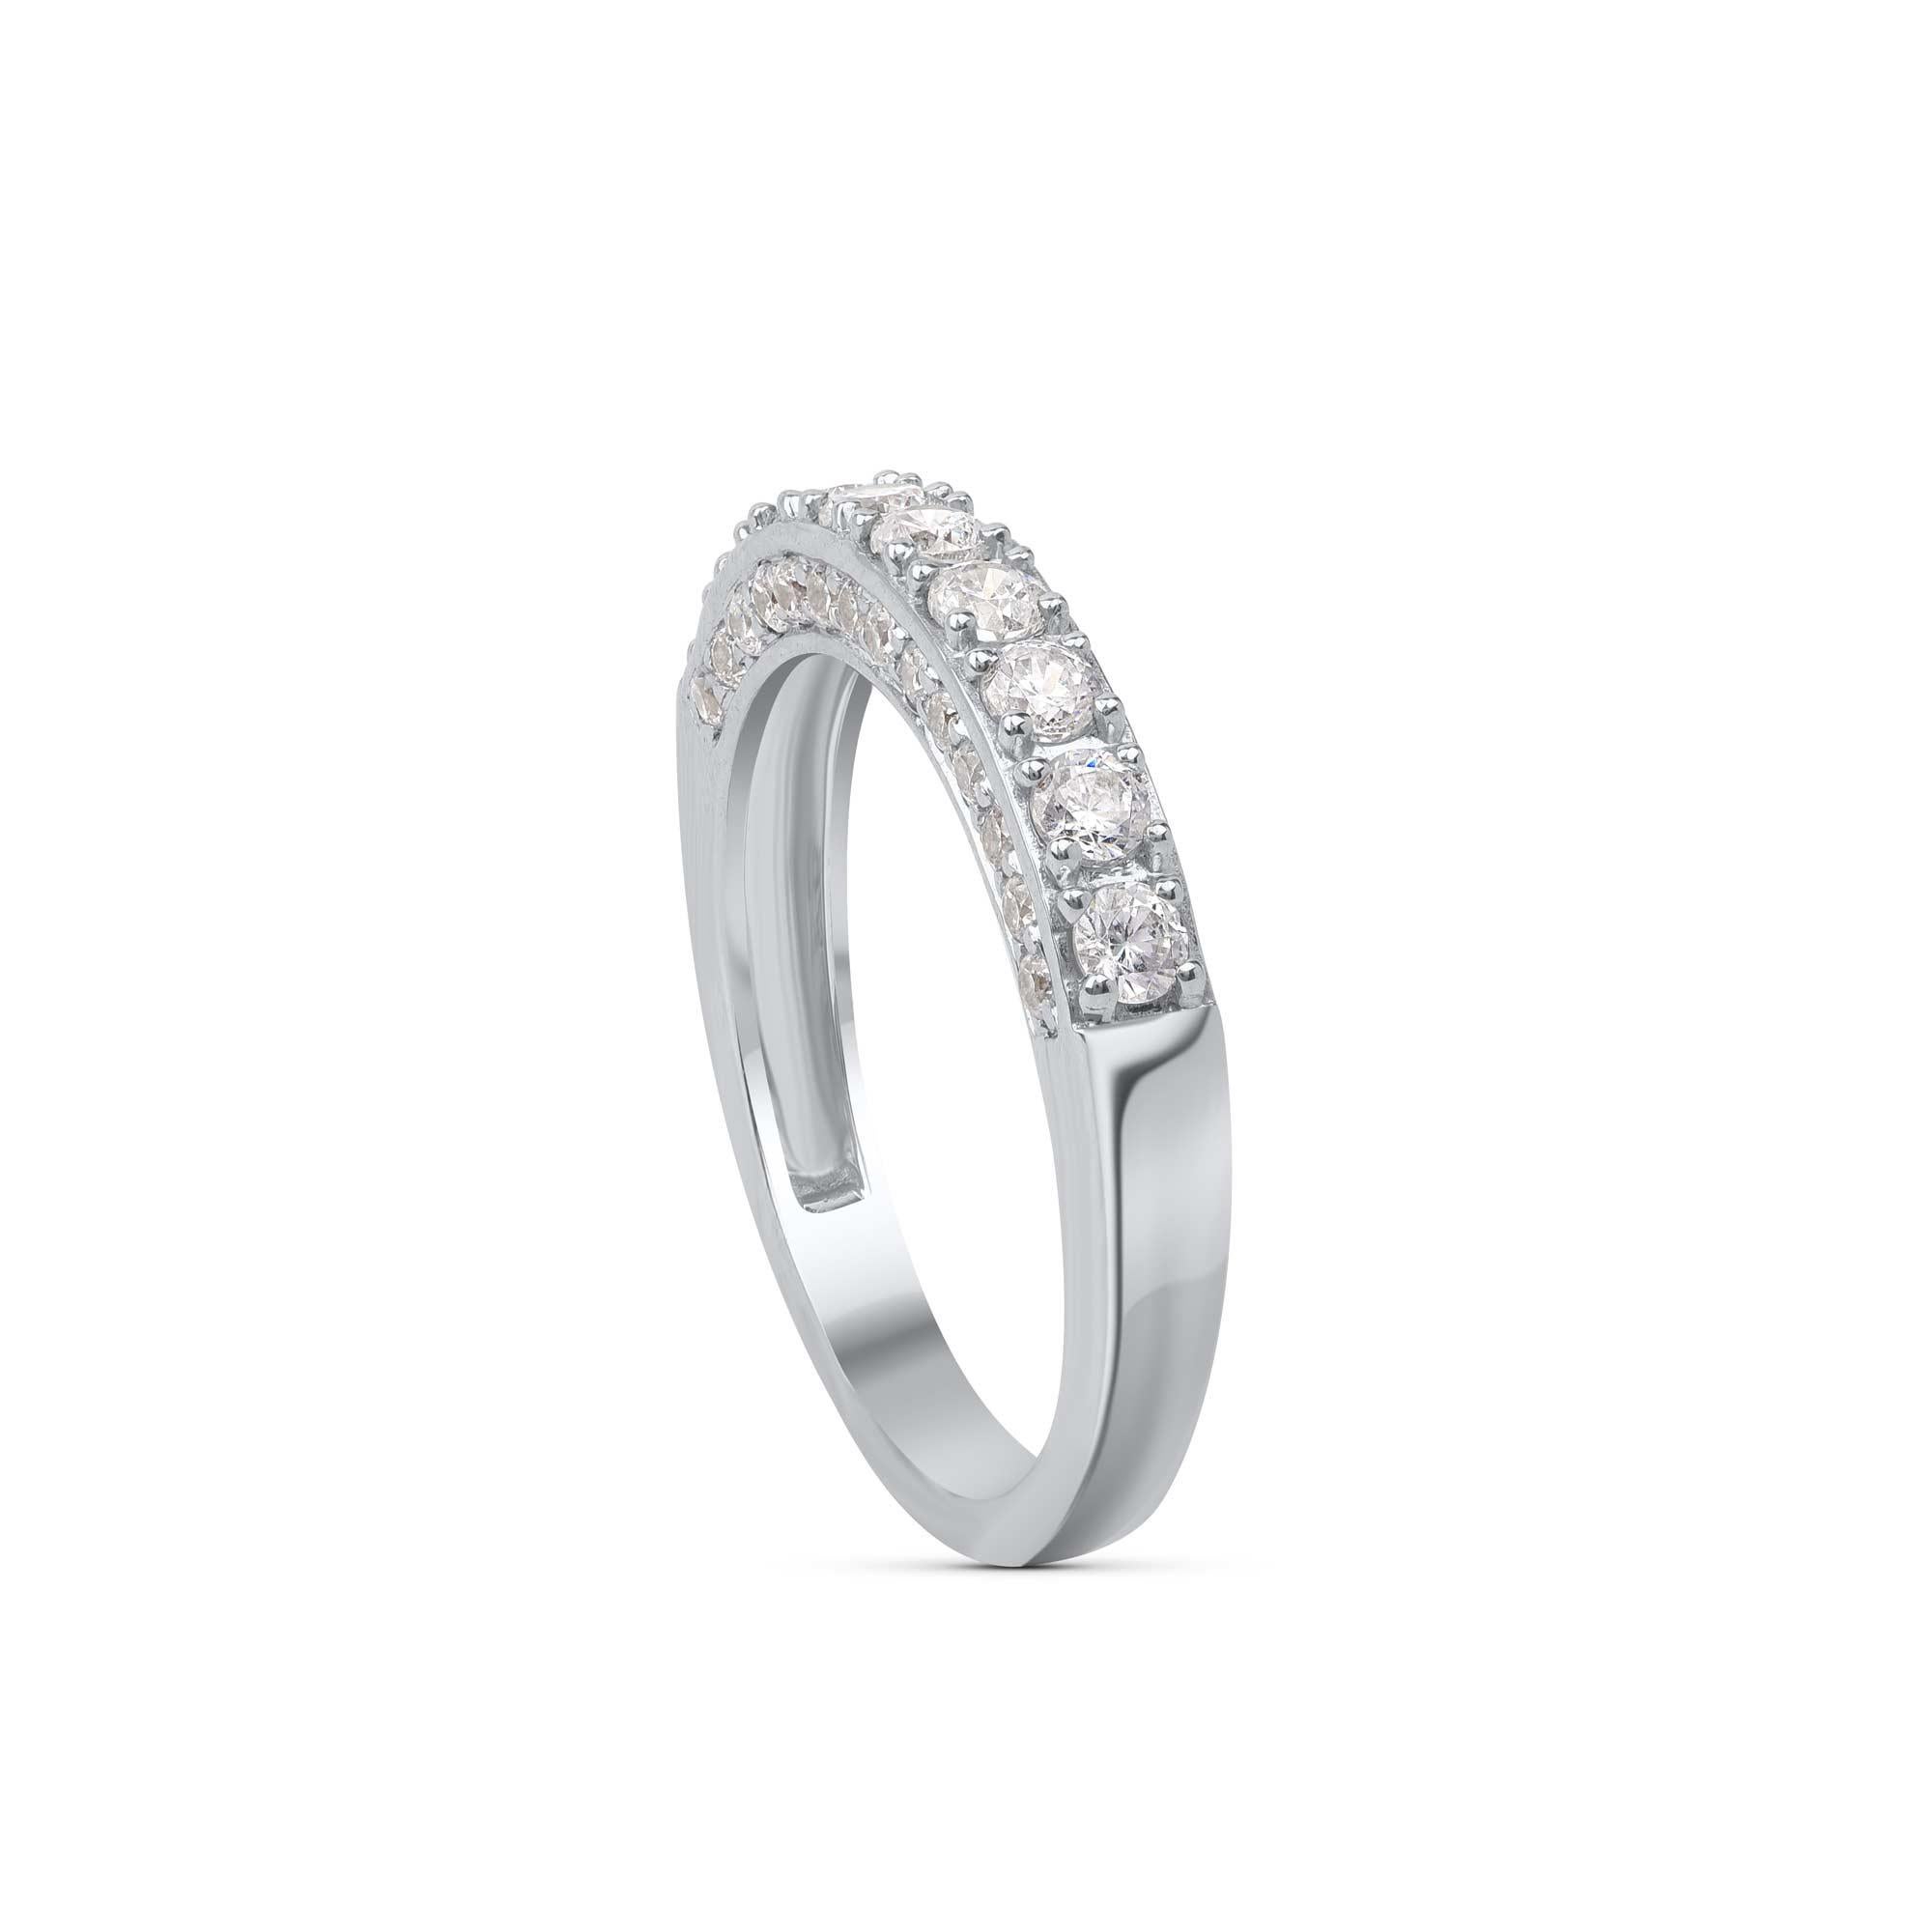 Contemporary TJD 1.0 Carat Brilliant Diamond 14KT White Gold Stackable Wedding Band Ring For Sale